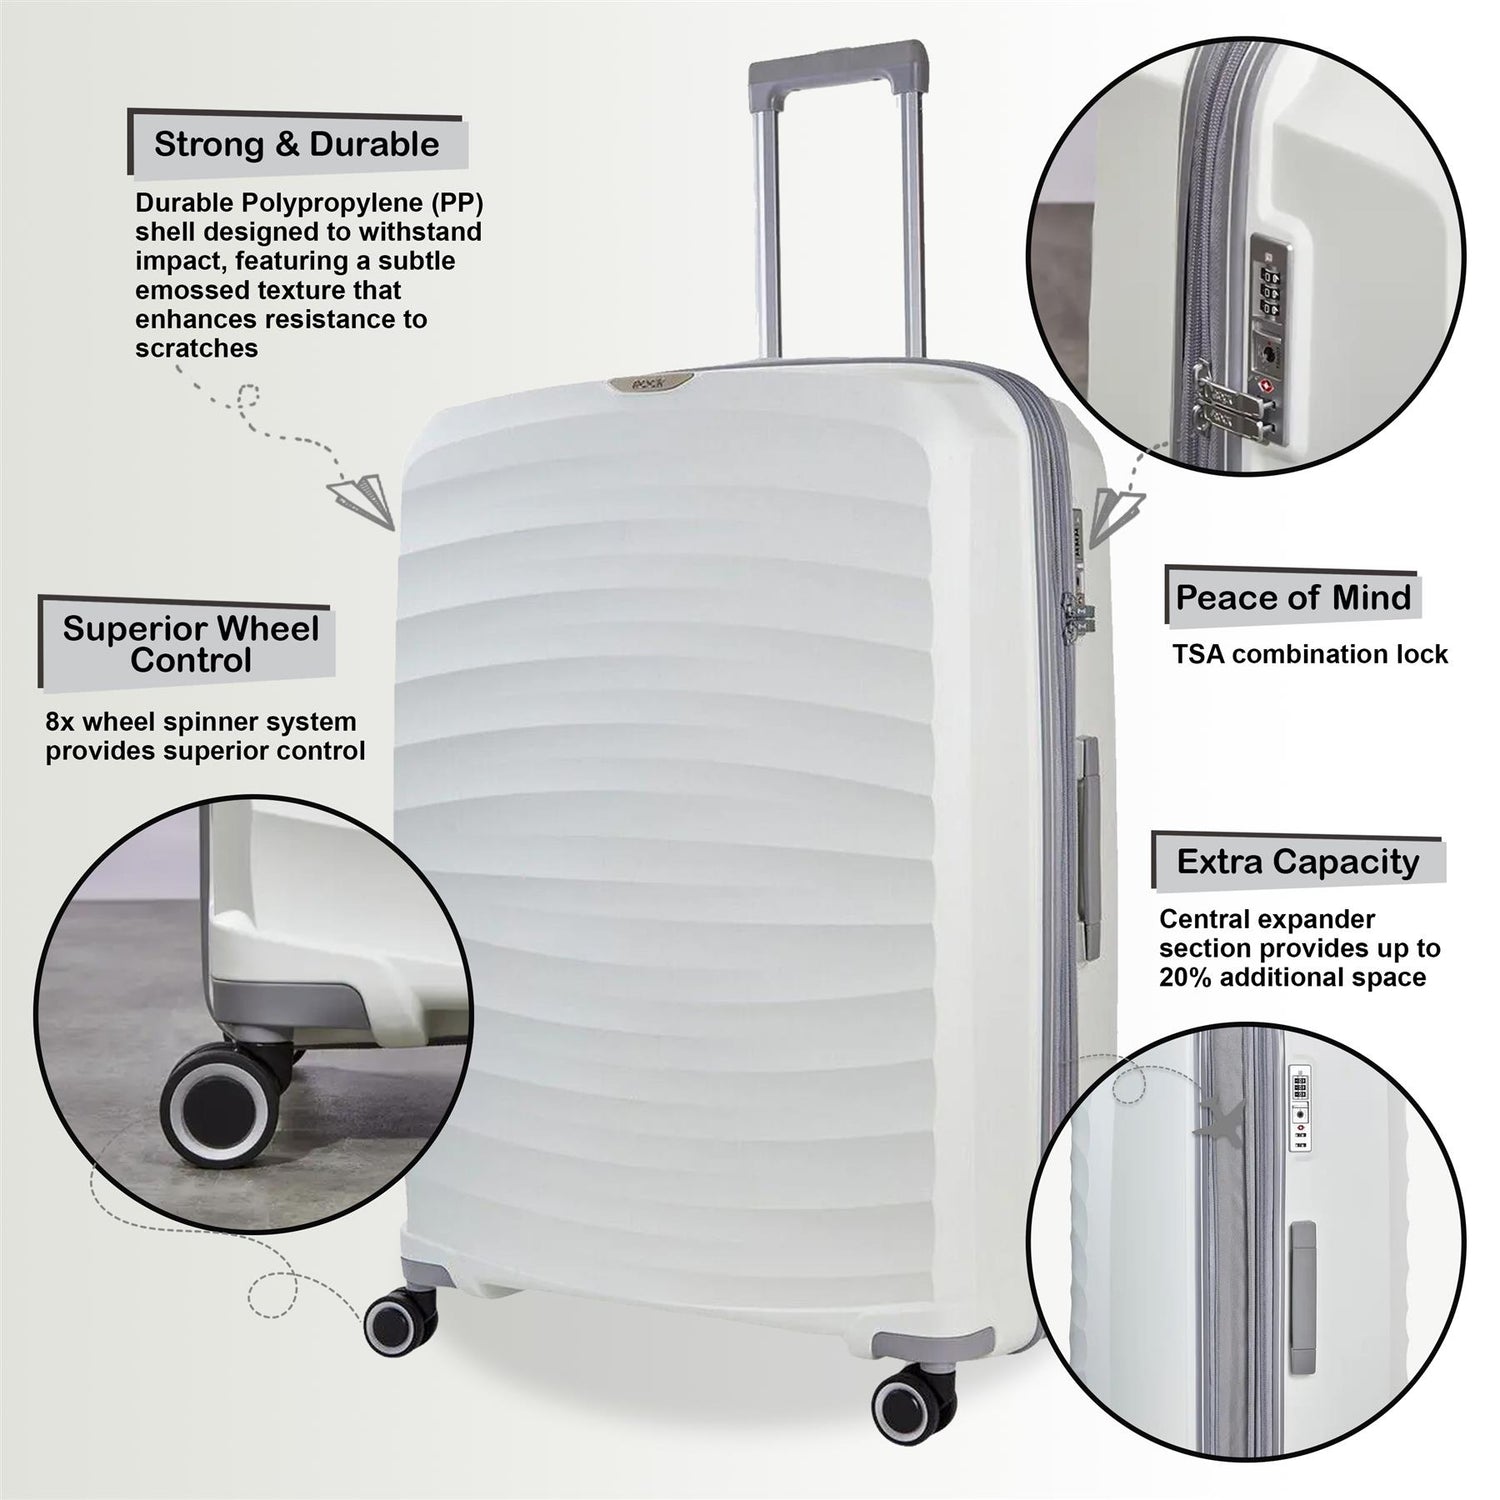 Altoona Set of 3 Hard Shell Suitcase in White